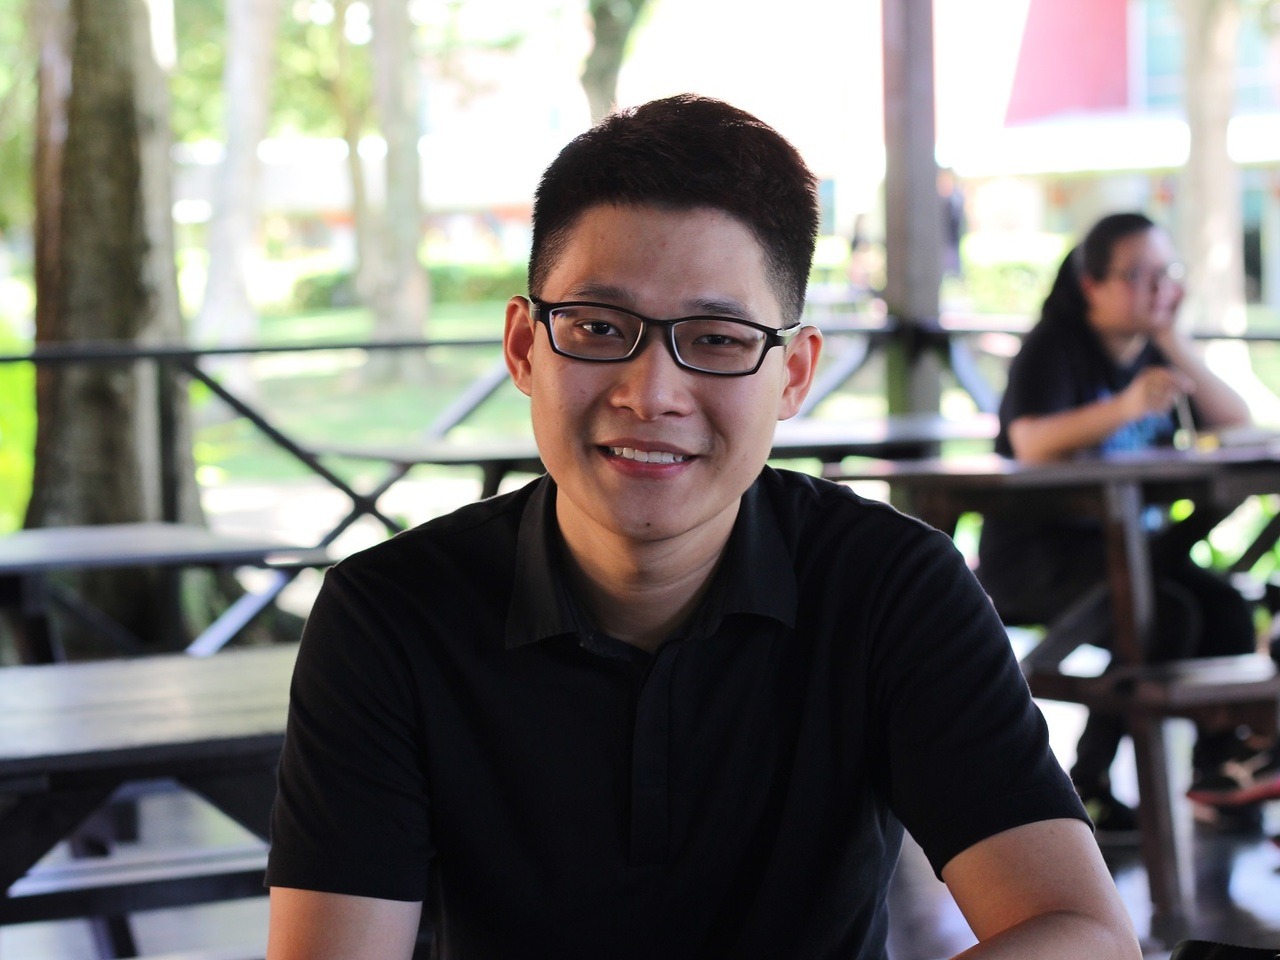 “I started job hunting even before graduation and fortunately found one at Mewah Oleo Industries, which is a palm oil refinery company in Johore, just before graduation day. “What do I cherish most about my university experience? I think the many...